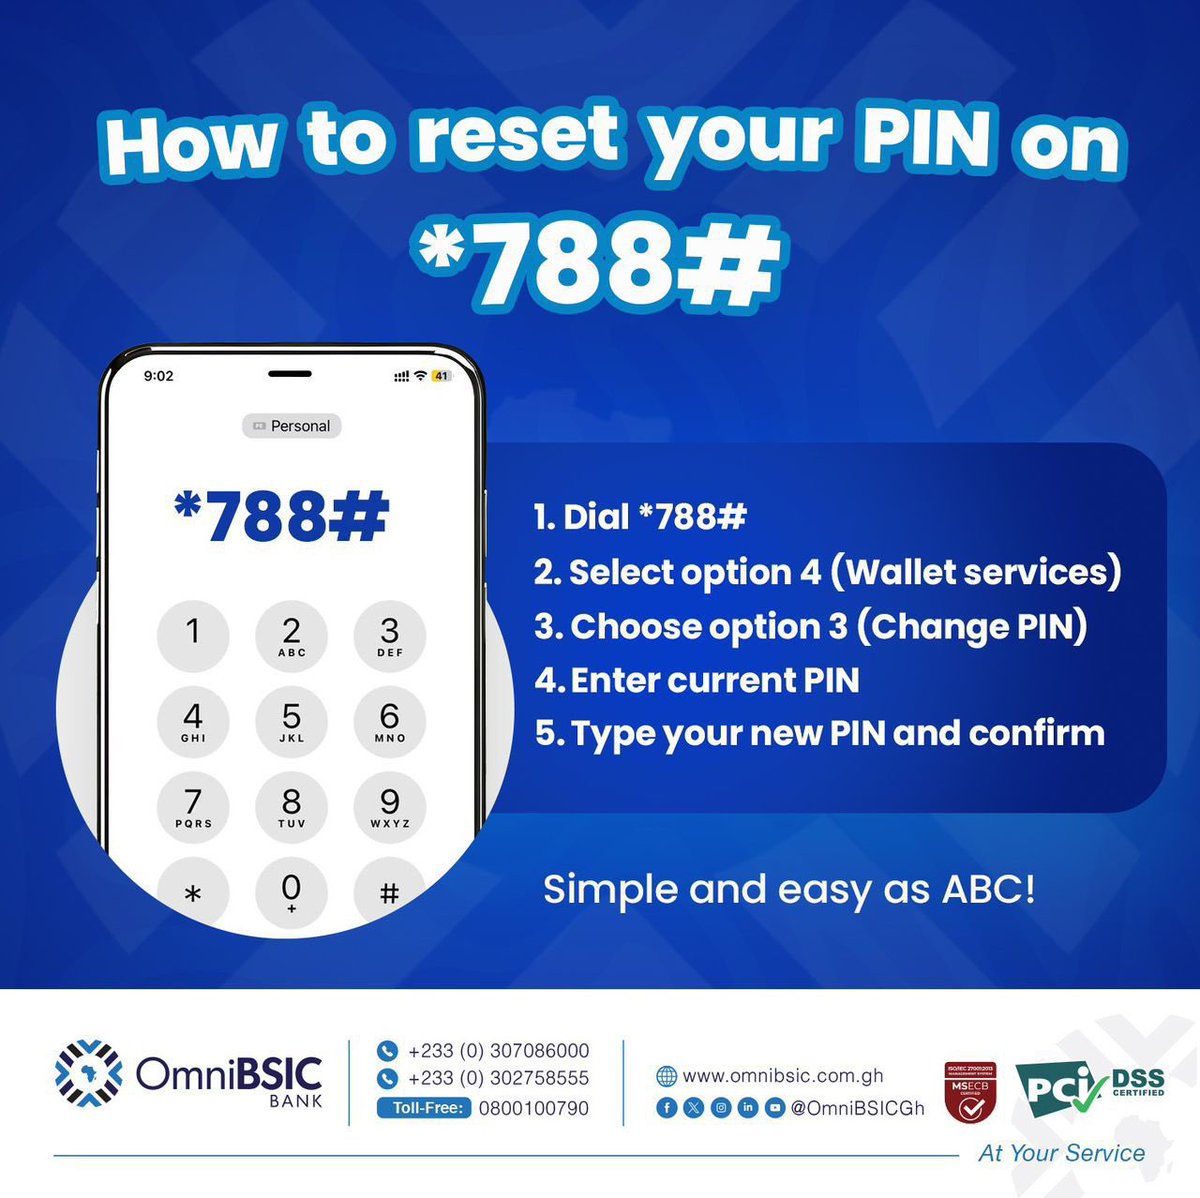 Follow these steps to reset your PIN with *788# 📱 

#OmniBSICBank #BestBanksInGhana #BanksInGhana #AtYourService 
omnibsic.com.gh